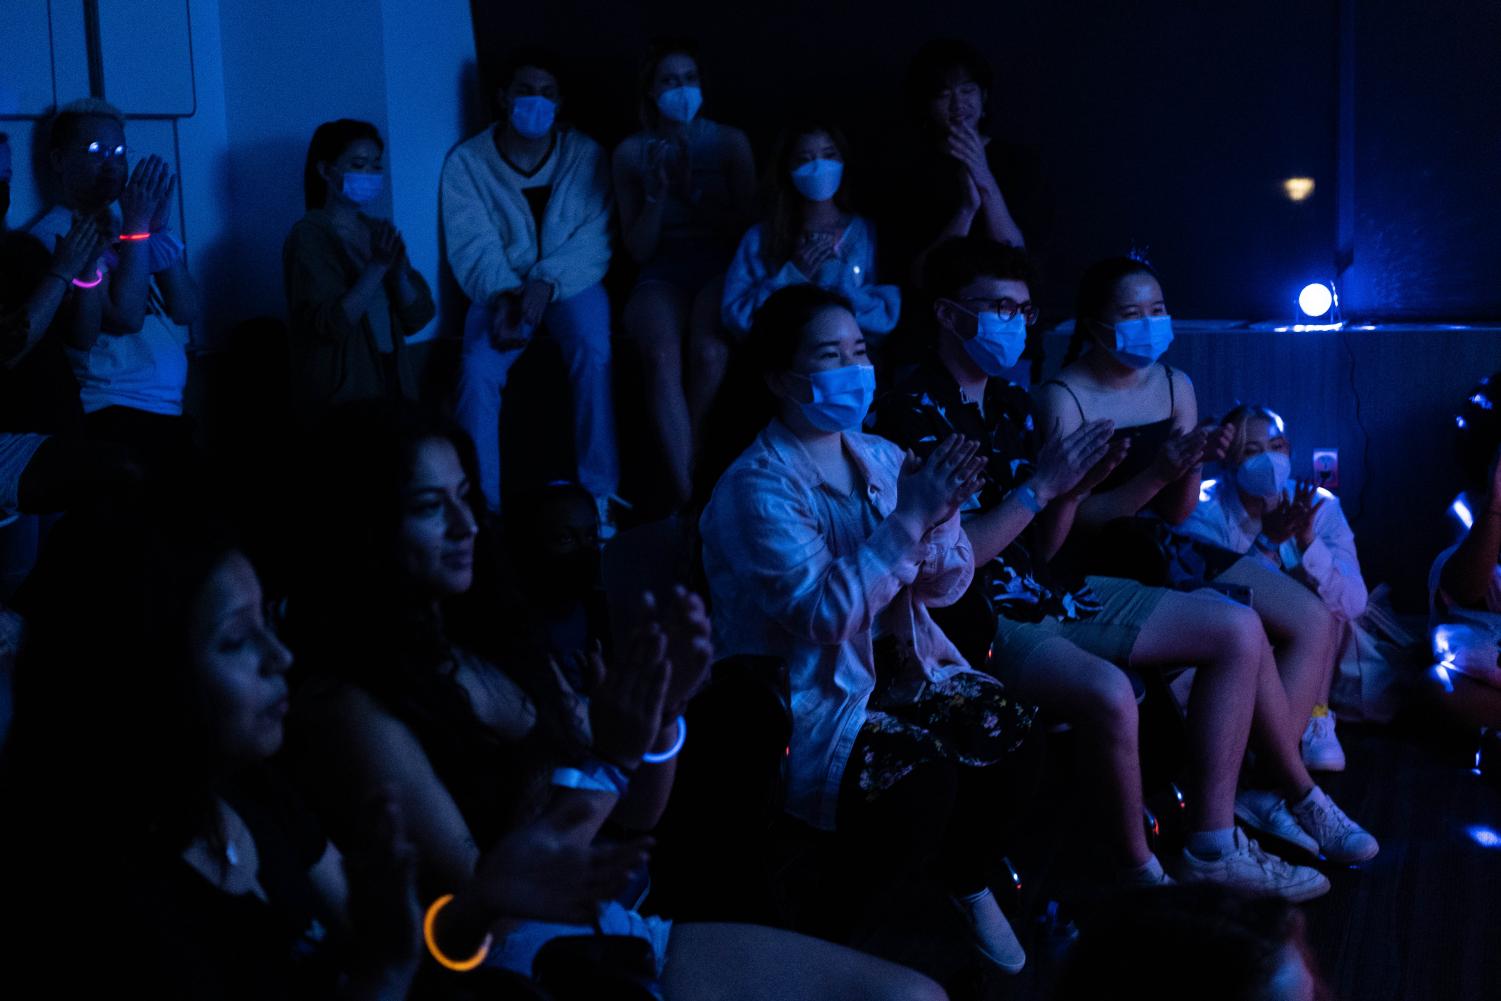 A crowd of people clap in a room with dim blue lighting.